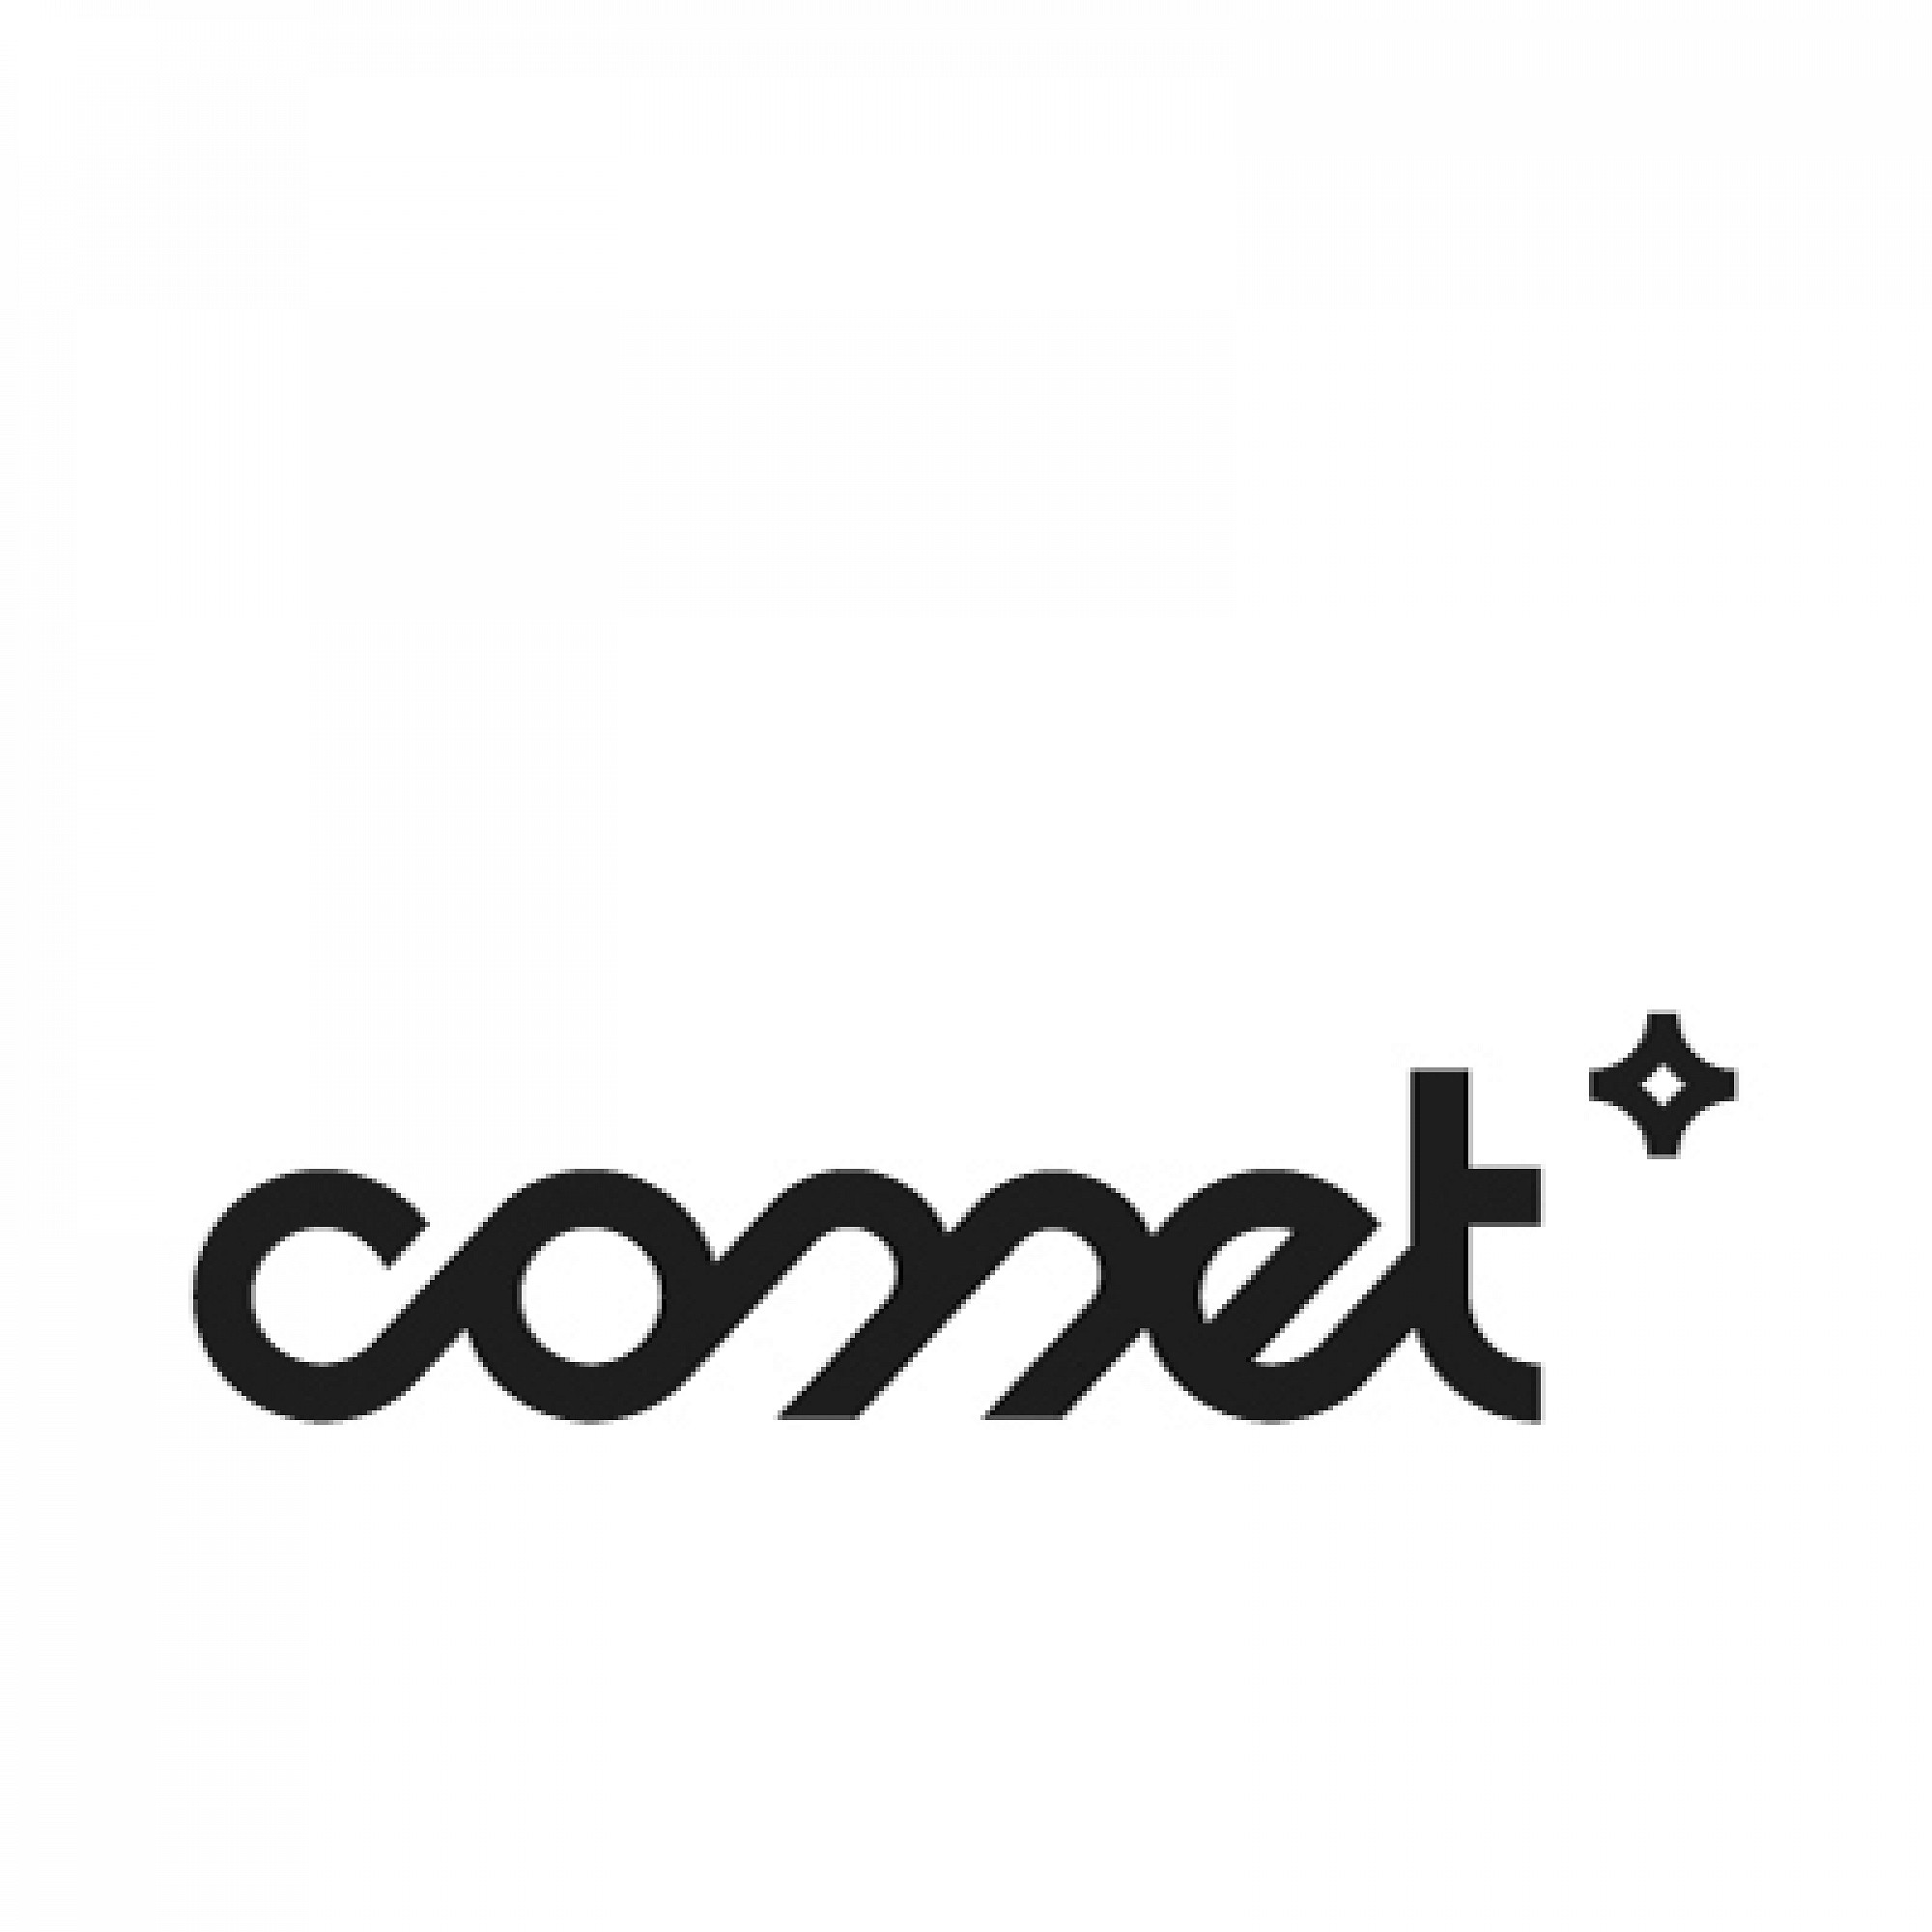 Hambro Perks Completes Investment in Comet, the Leading Provider of Specialist Tech Freelancer Talent in France.